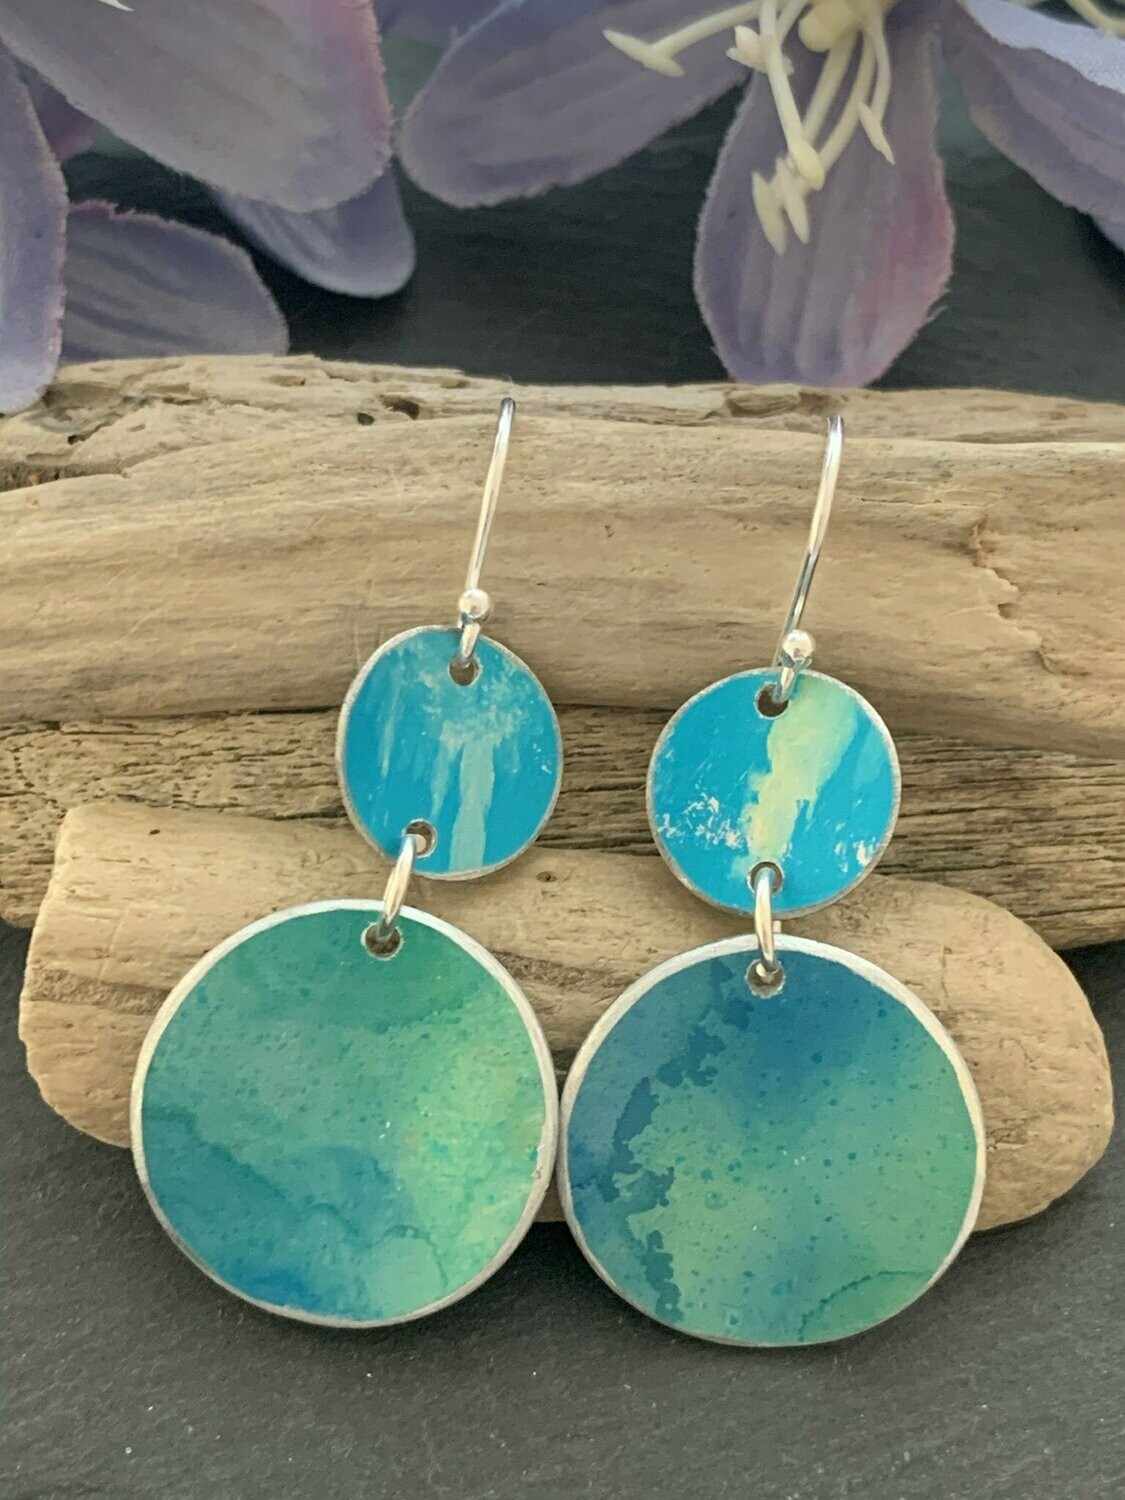 Printed Aluminium and sterling silver drop earrings - turquoise and apple green